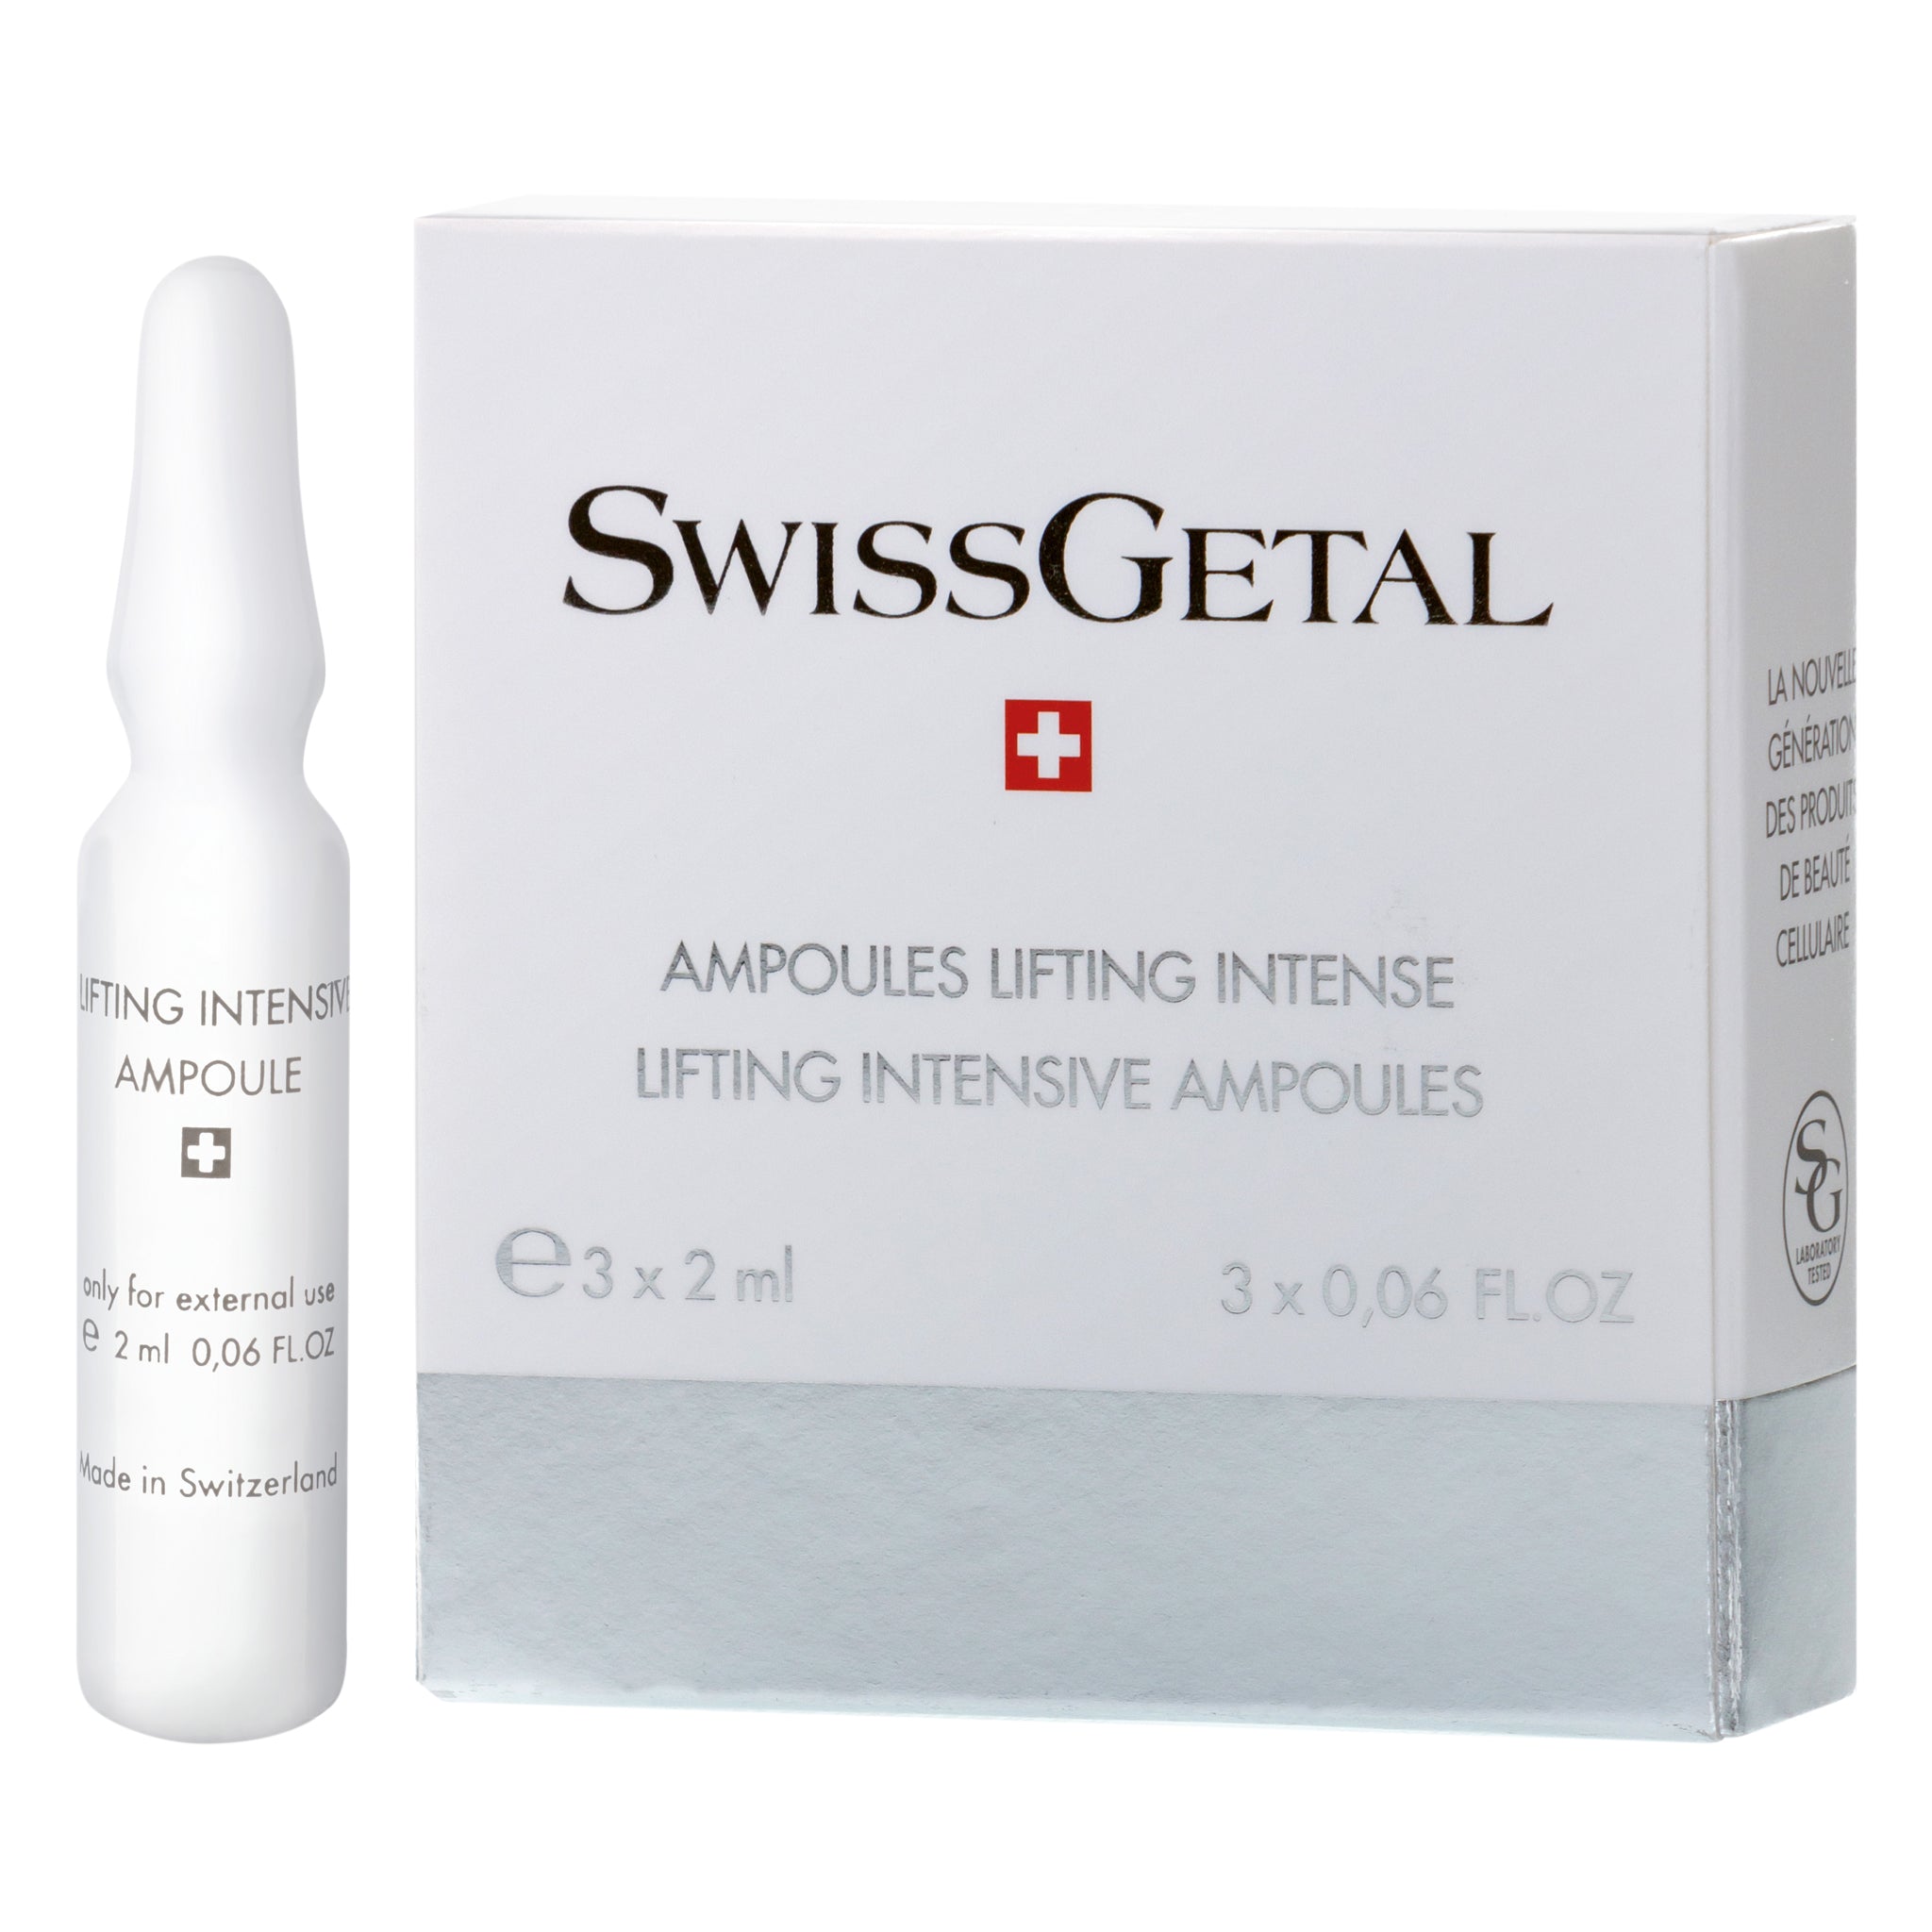 Lifting Intensive Ampoules